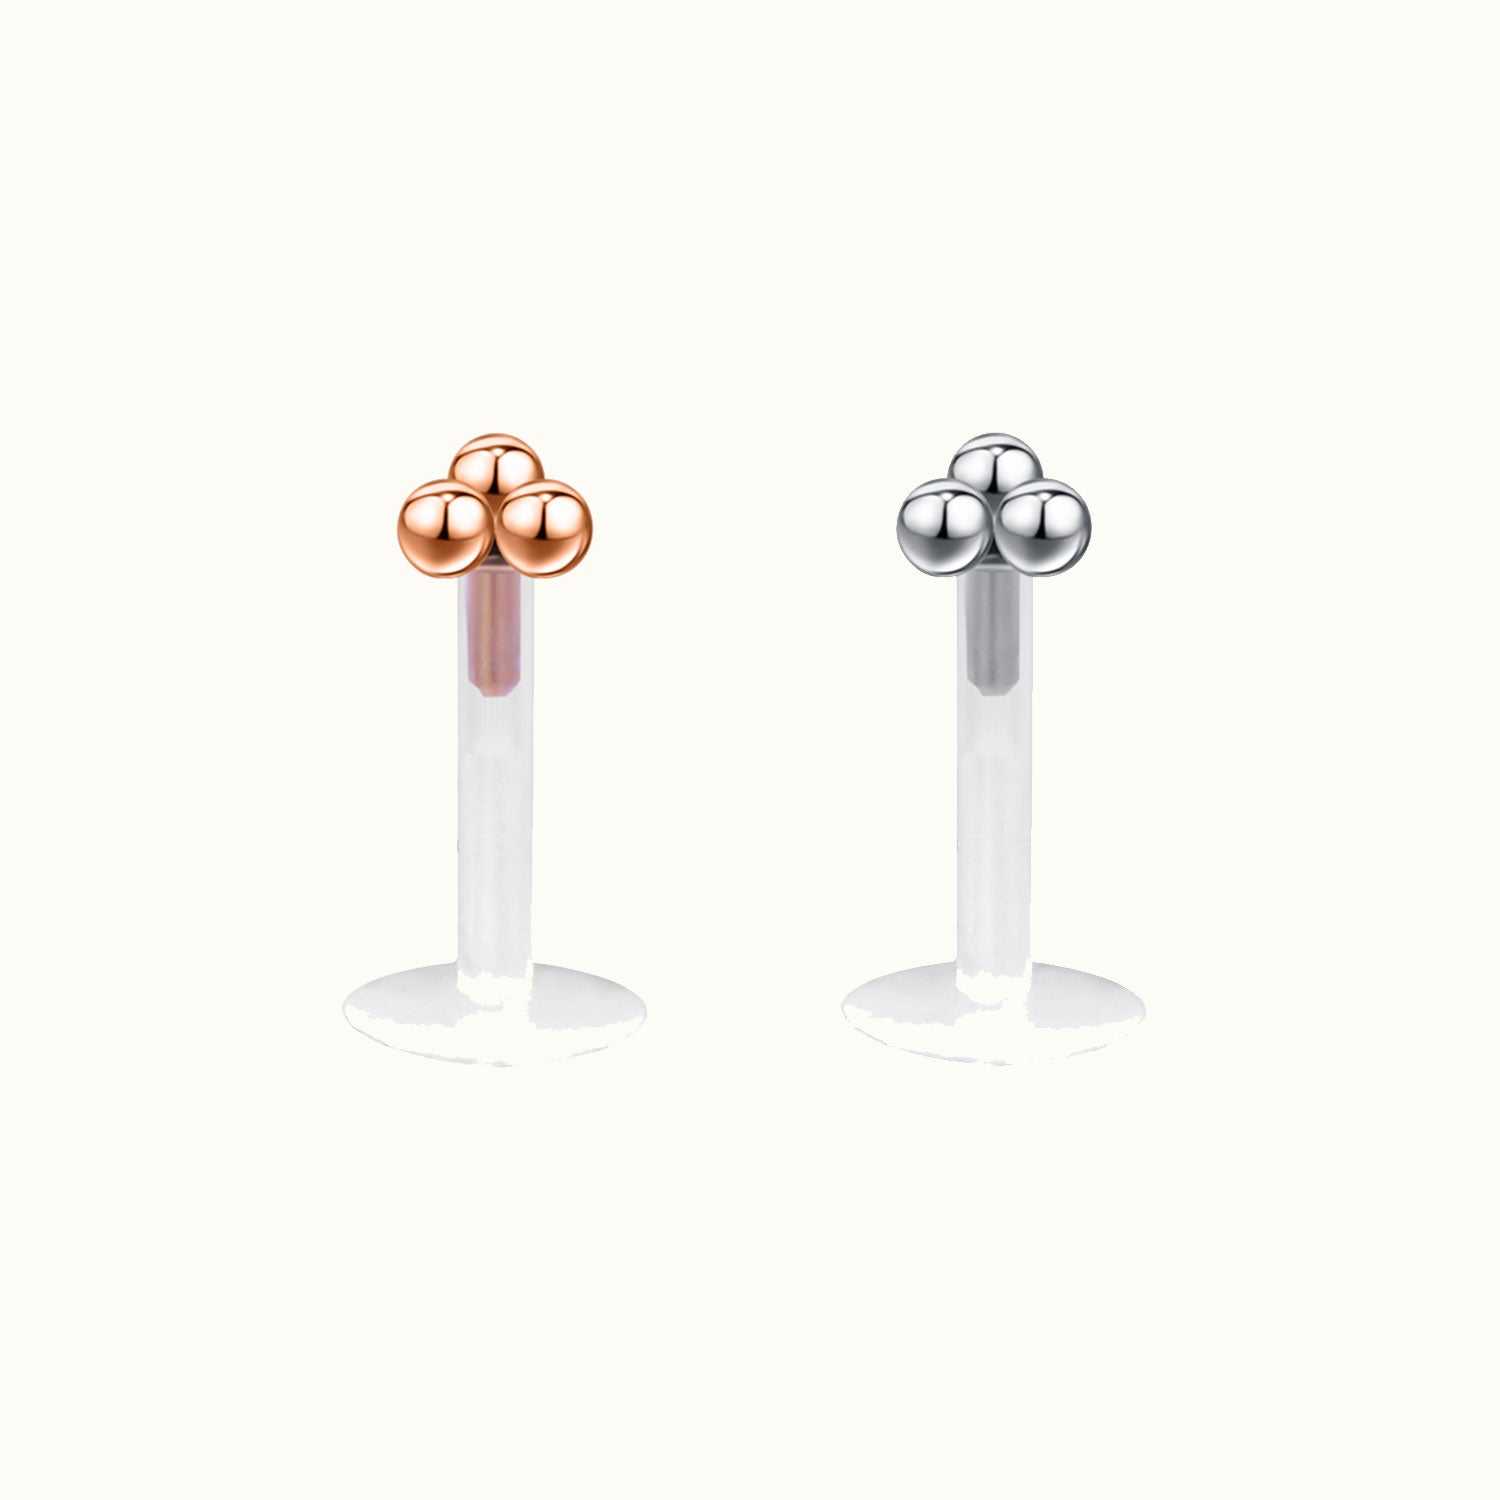 16g-rose-gold-sliver-balls-labret-rings-arcylic-conch-tragus-helix-monroe-lip-piercing